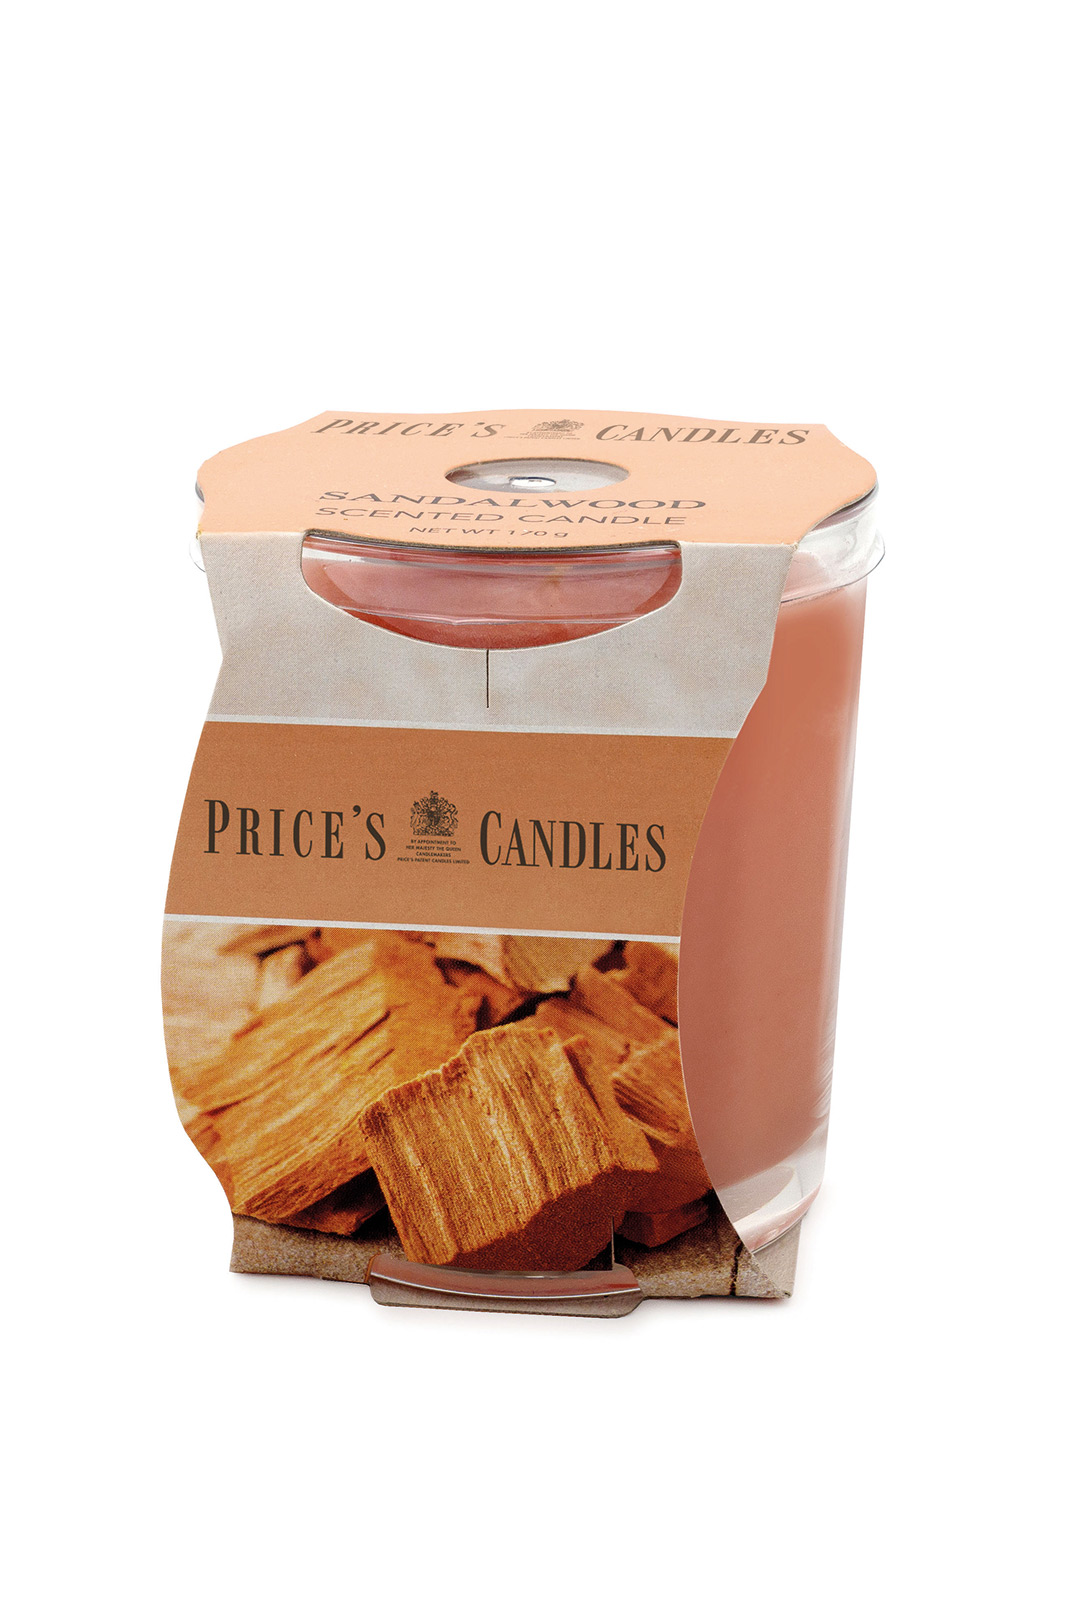 Prices Candle "Sandalwood" 170g     